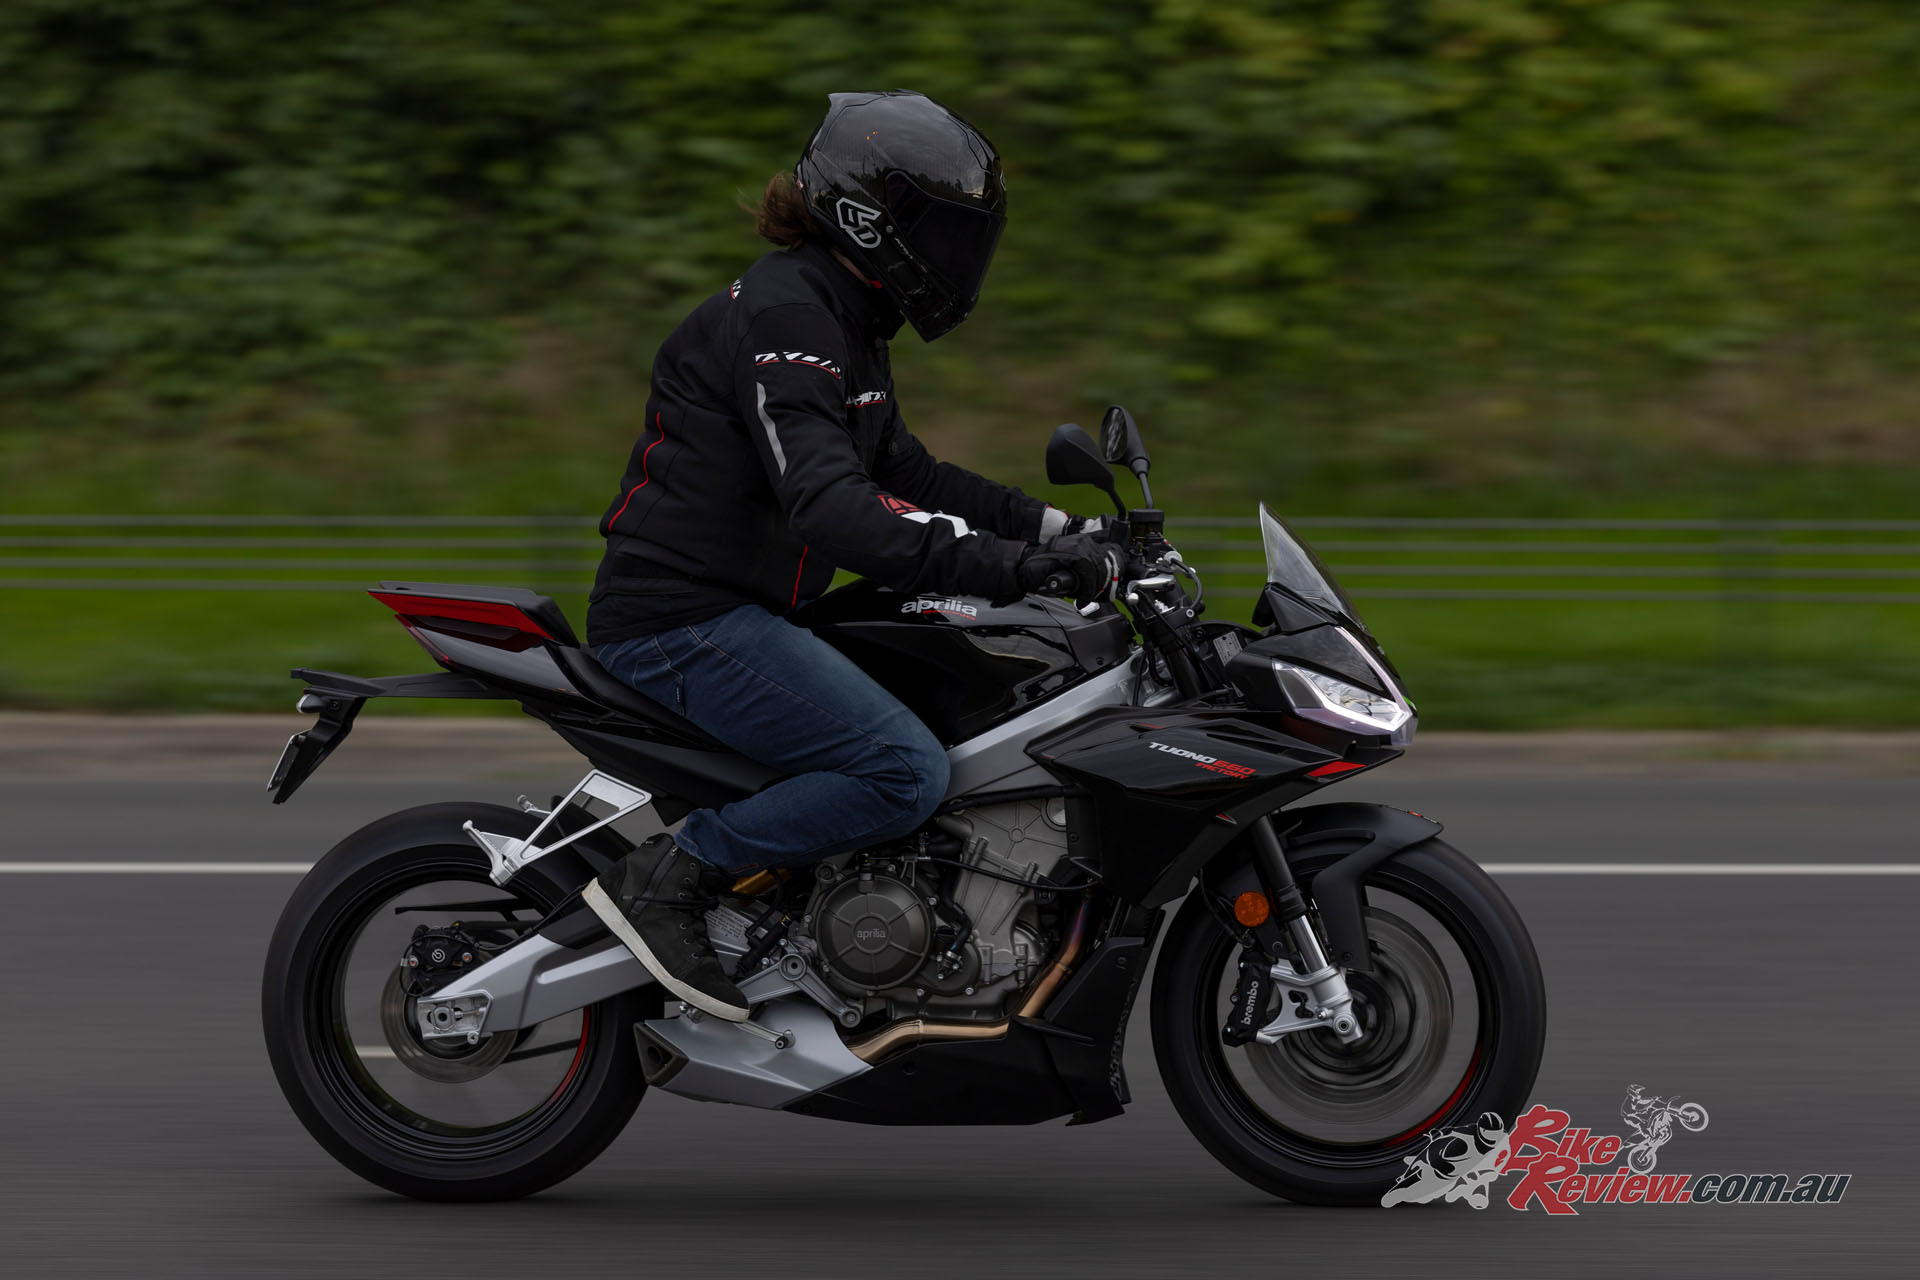 "The fact that I can commute on Australian roads without having to report back that my wrists hurt from the front being too harsh or too aggressive whilst singing praises of its cornering ability is a testament to what the blokes at the KYB factory have made in cahoots with Aprilia."